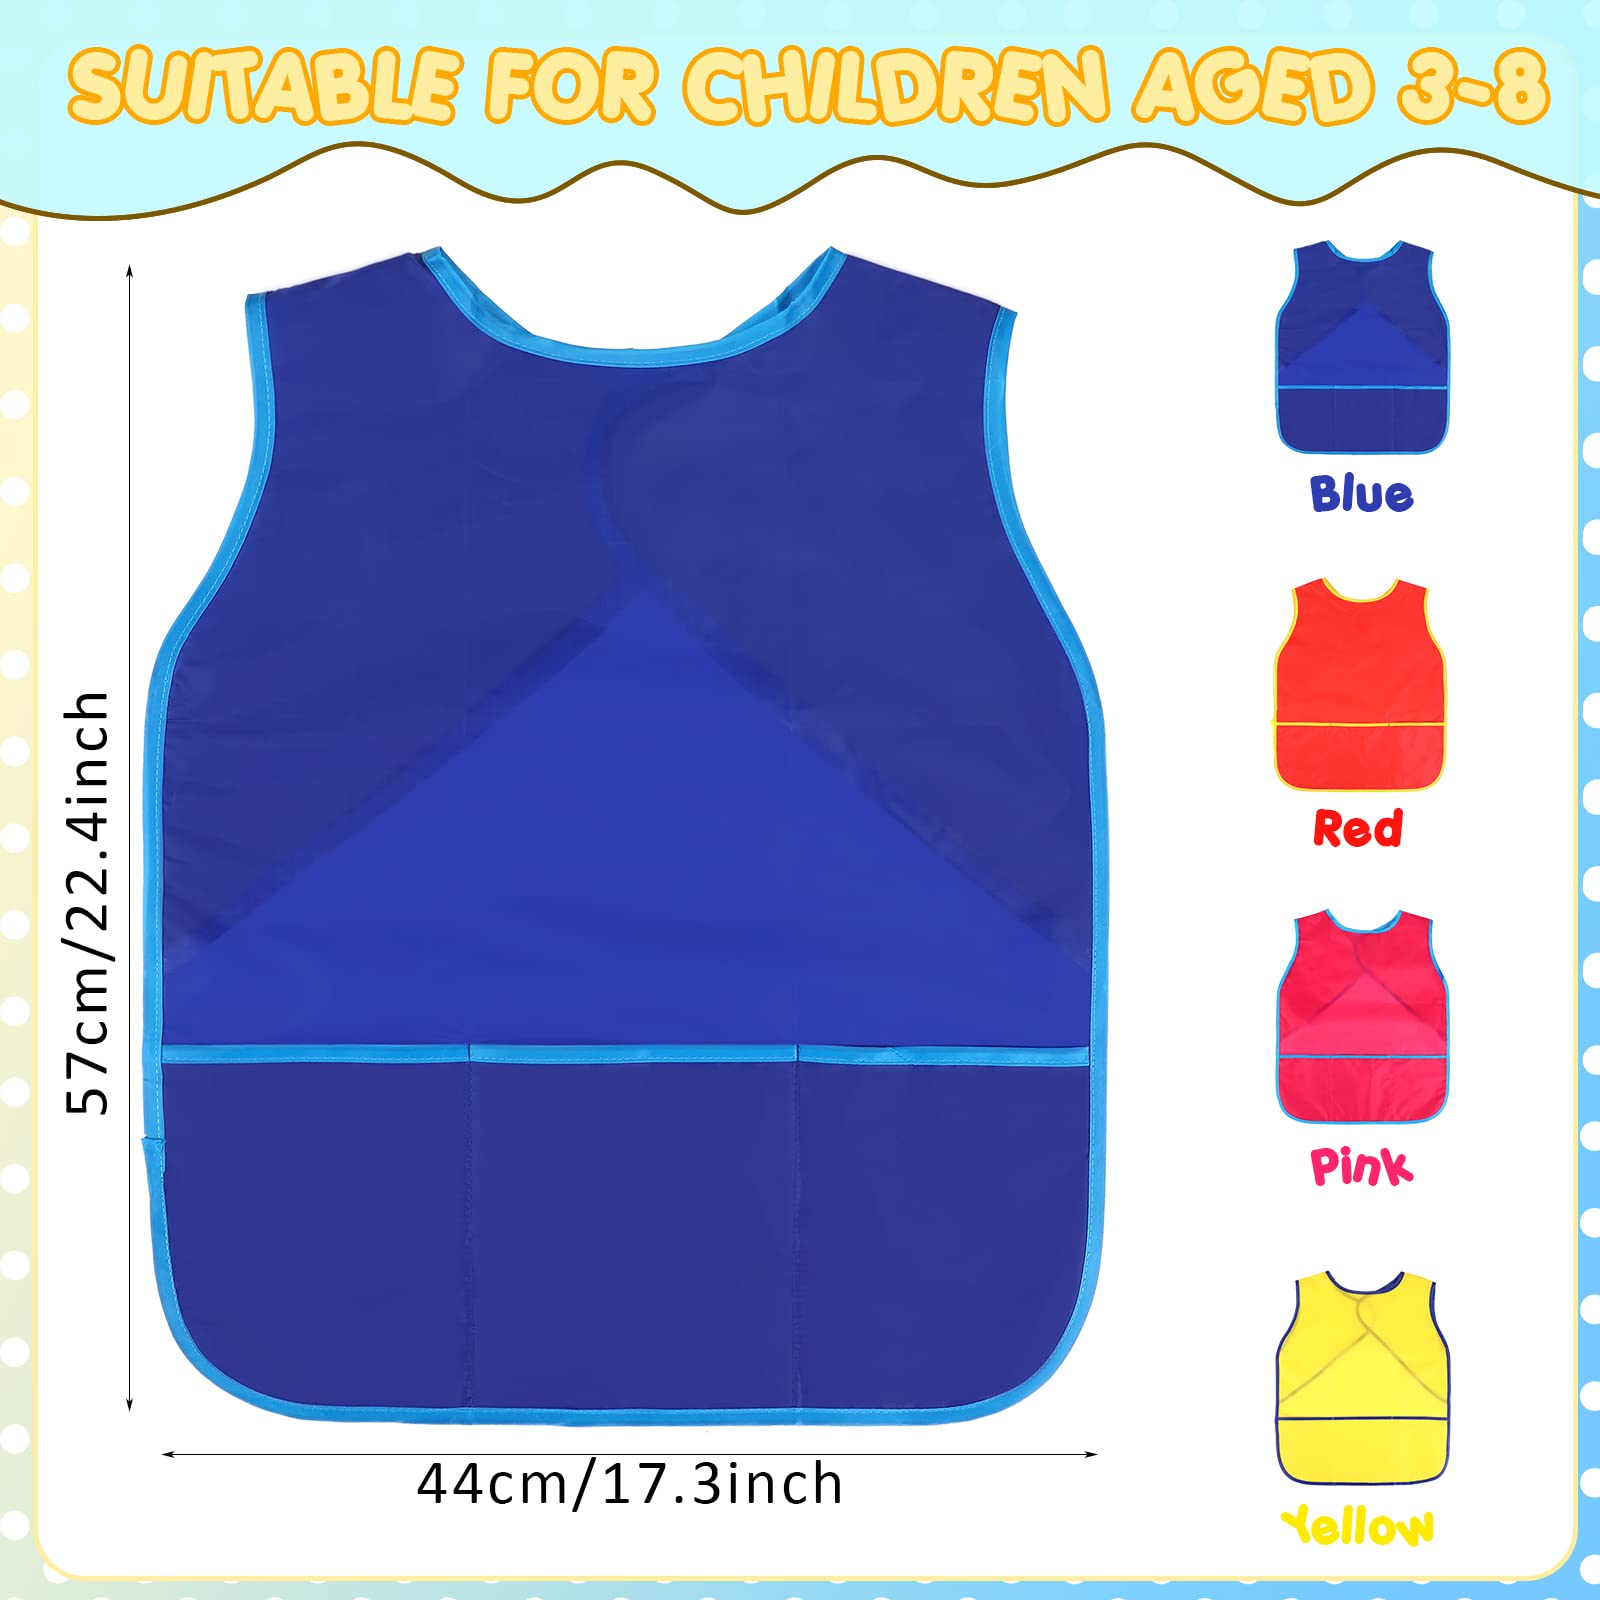 Juinipe 12 Pcs Art Smock for Kids Waterproof Artist Painting Aprons Sleeveless Children Art Smocks with Pockets Middle Size Kids Painting Smock for Age 3 to 8 Years Paint Art Craft Activity, 4 Colors